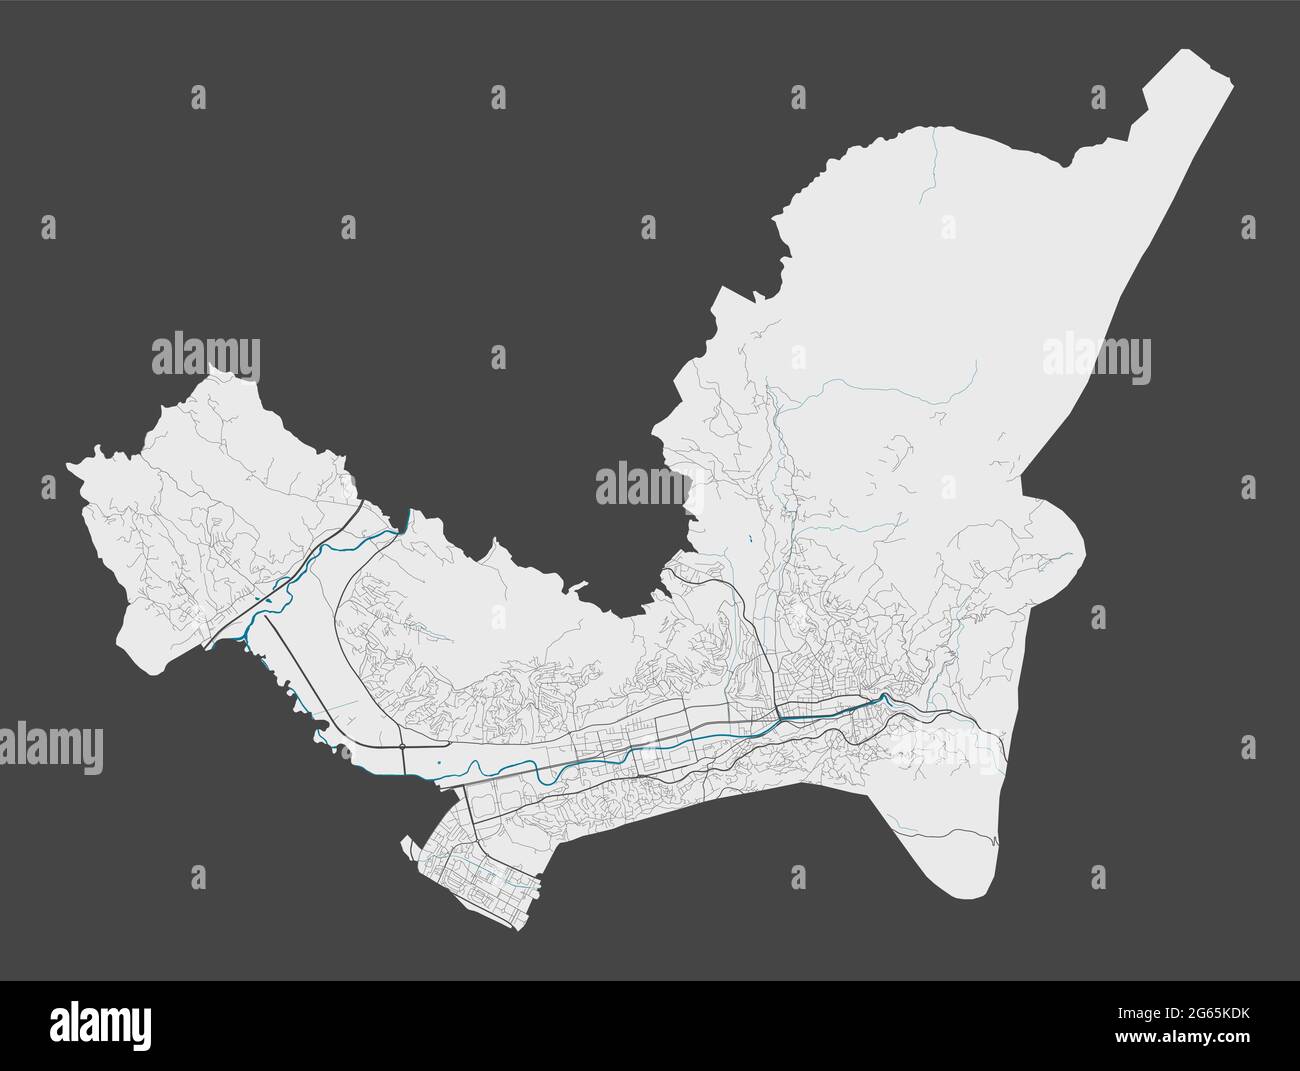 Sarajevo map. Detailed map of Sarajevo city administrative area. Cityscape panorama. Royalty free vector illustration. Outline map with highways, stre Stock Vector